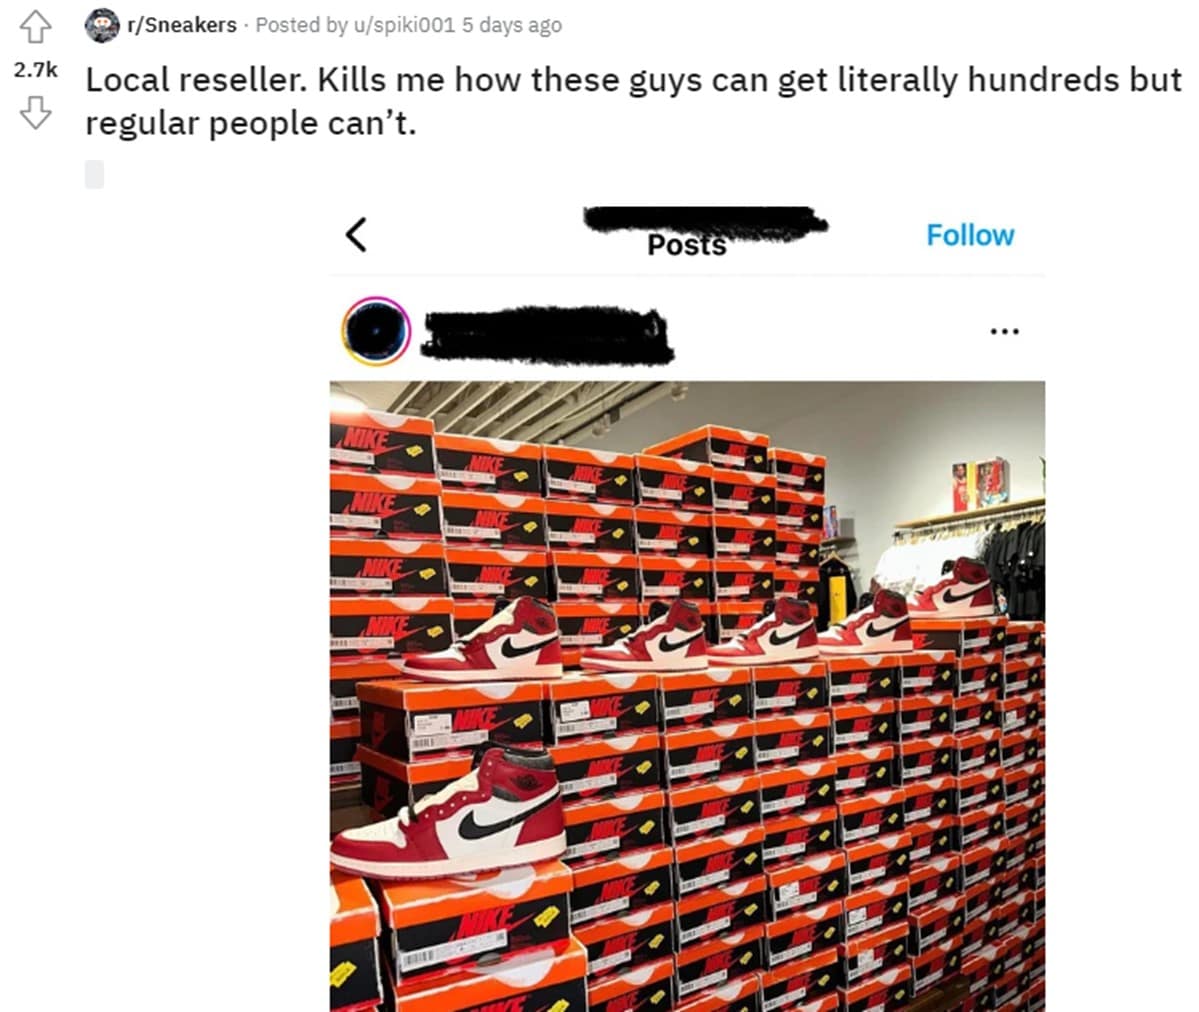 Reddit post complaining about a reseller flexing giant sneaker collection 